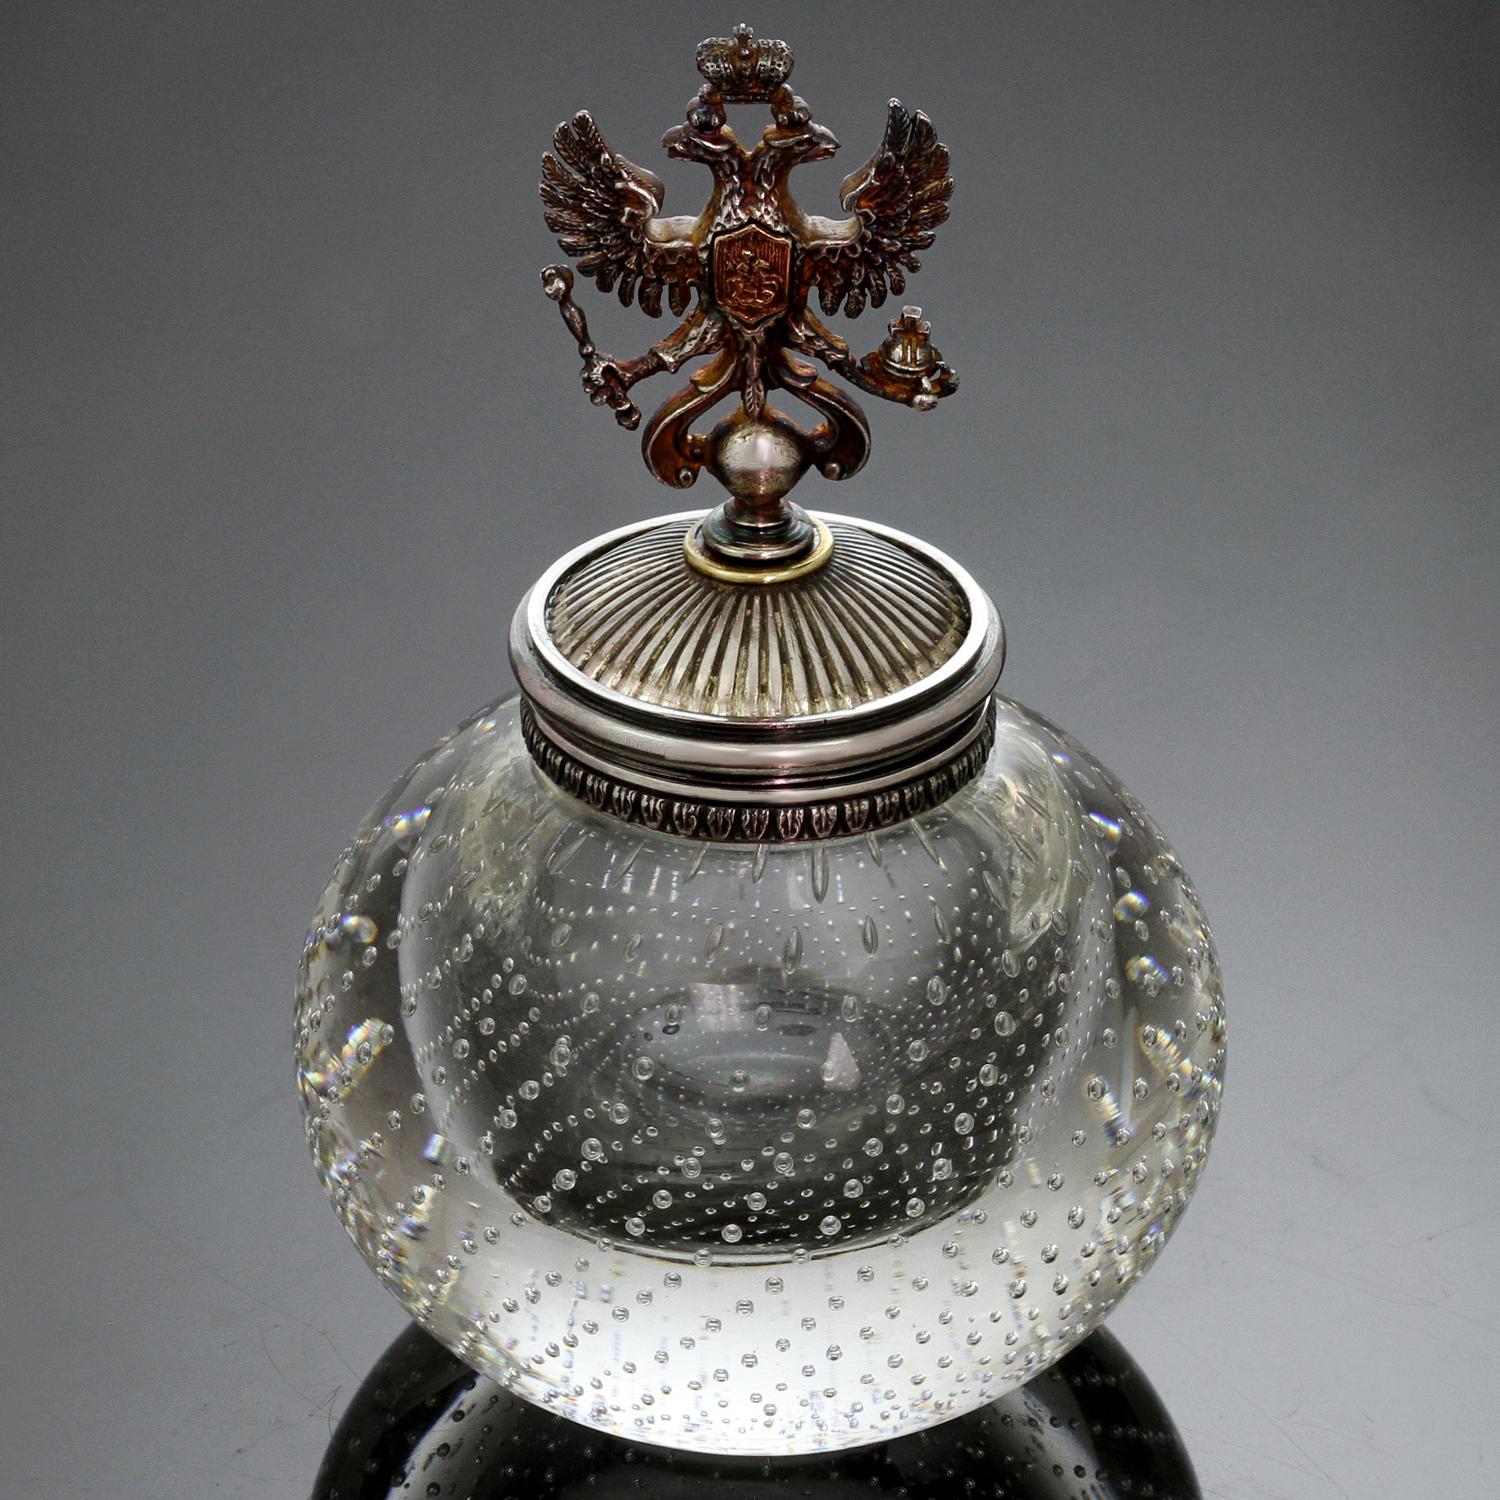 This exquisite Russian Imperial inkwell is crafted out of controlled bubble glass and features a hinged sterling silver double eagle lid. Made in Russia circa early 1900s.